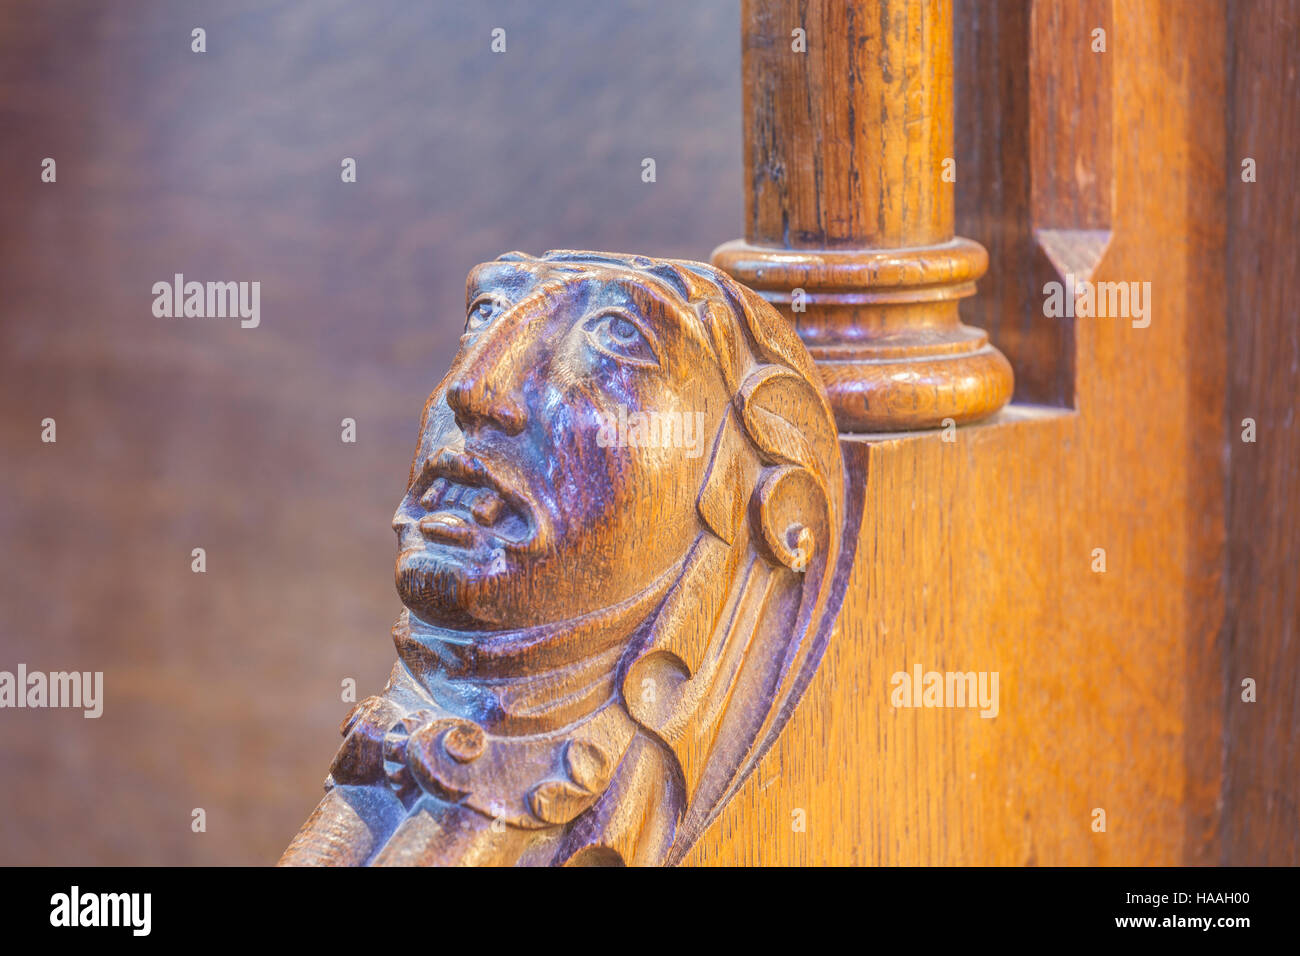 A carved wooden head on a choir stall in L'eglise de la Trinite d'Angers, Angers, France. Stock Photo